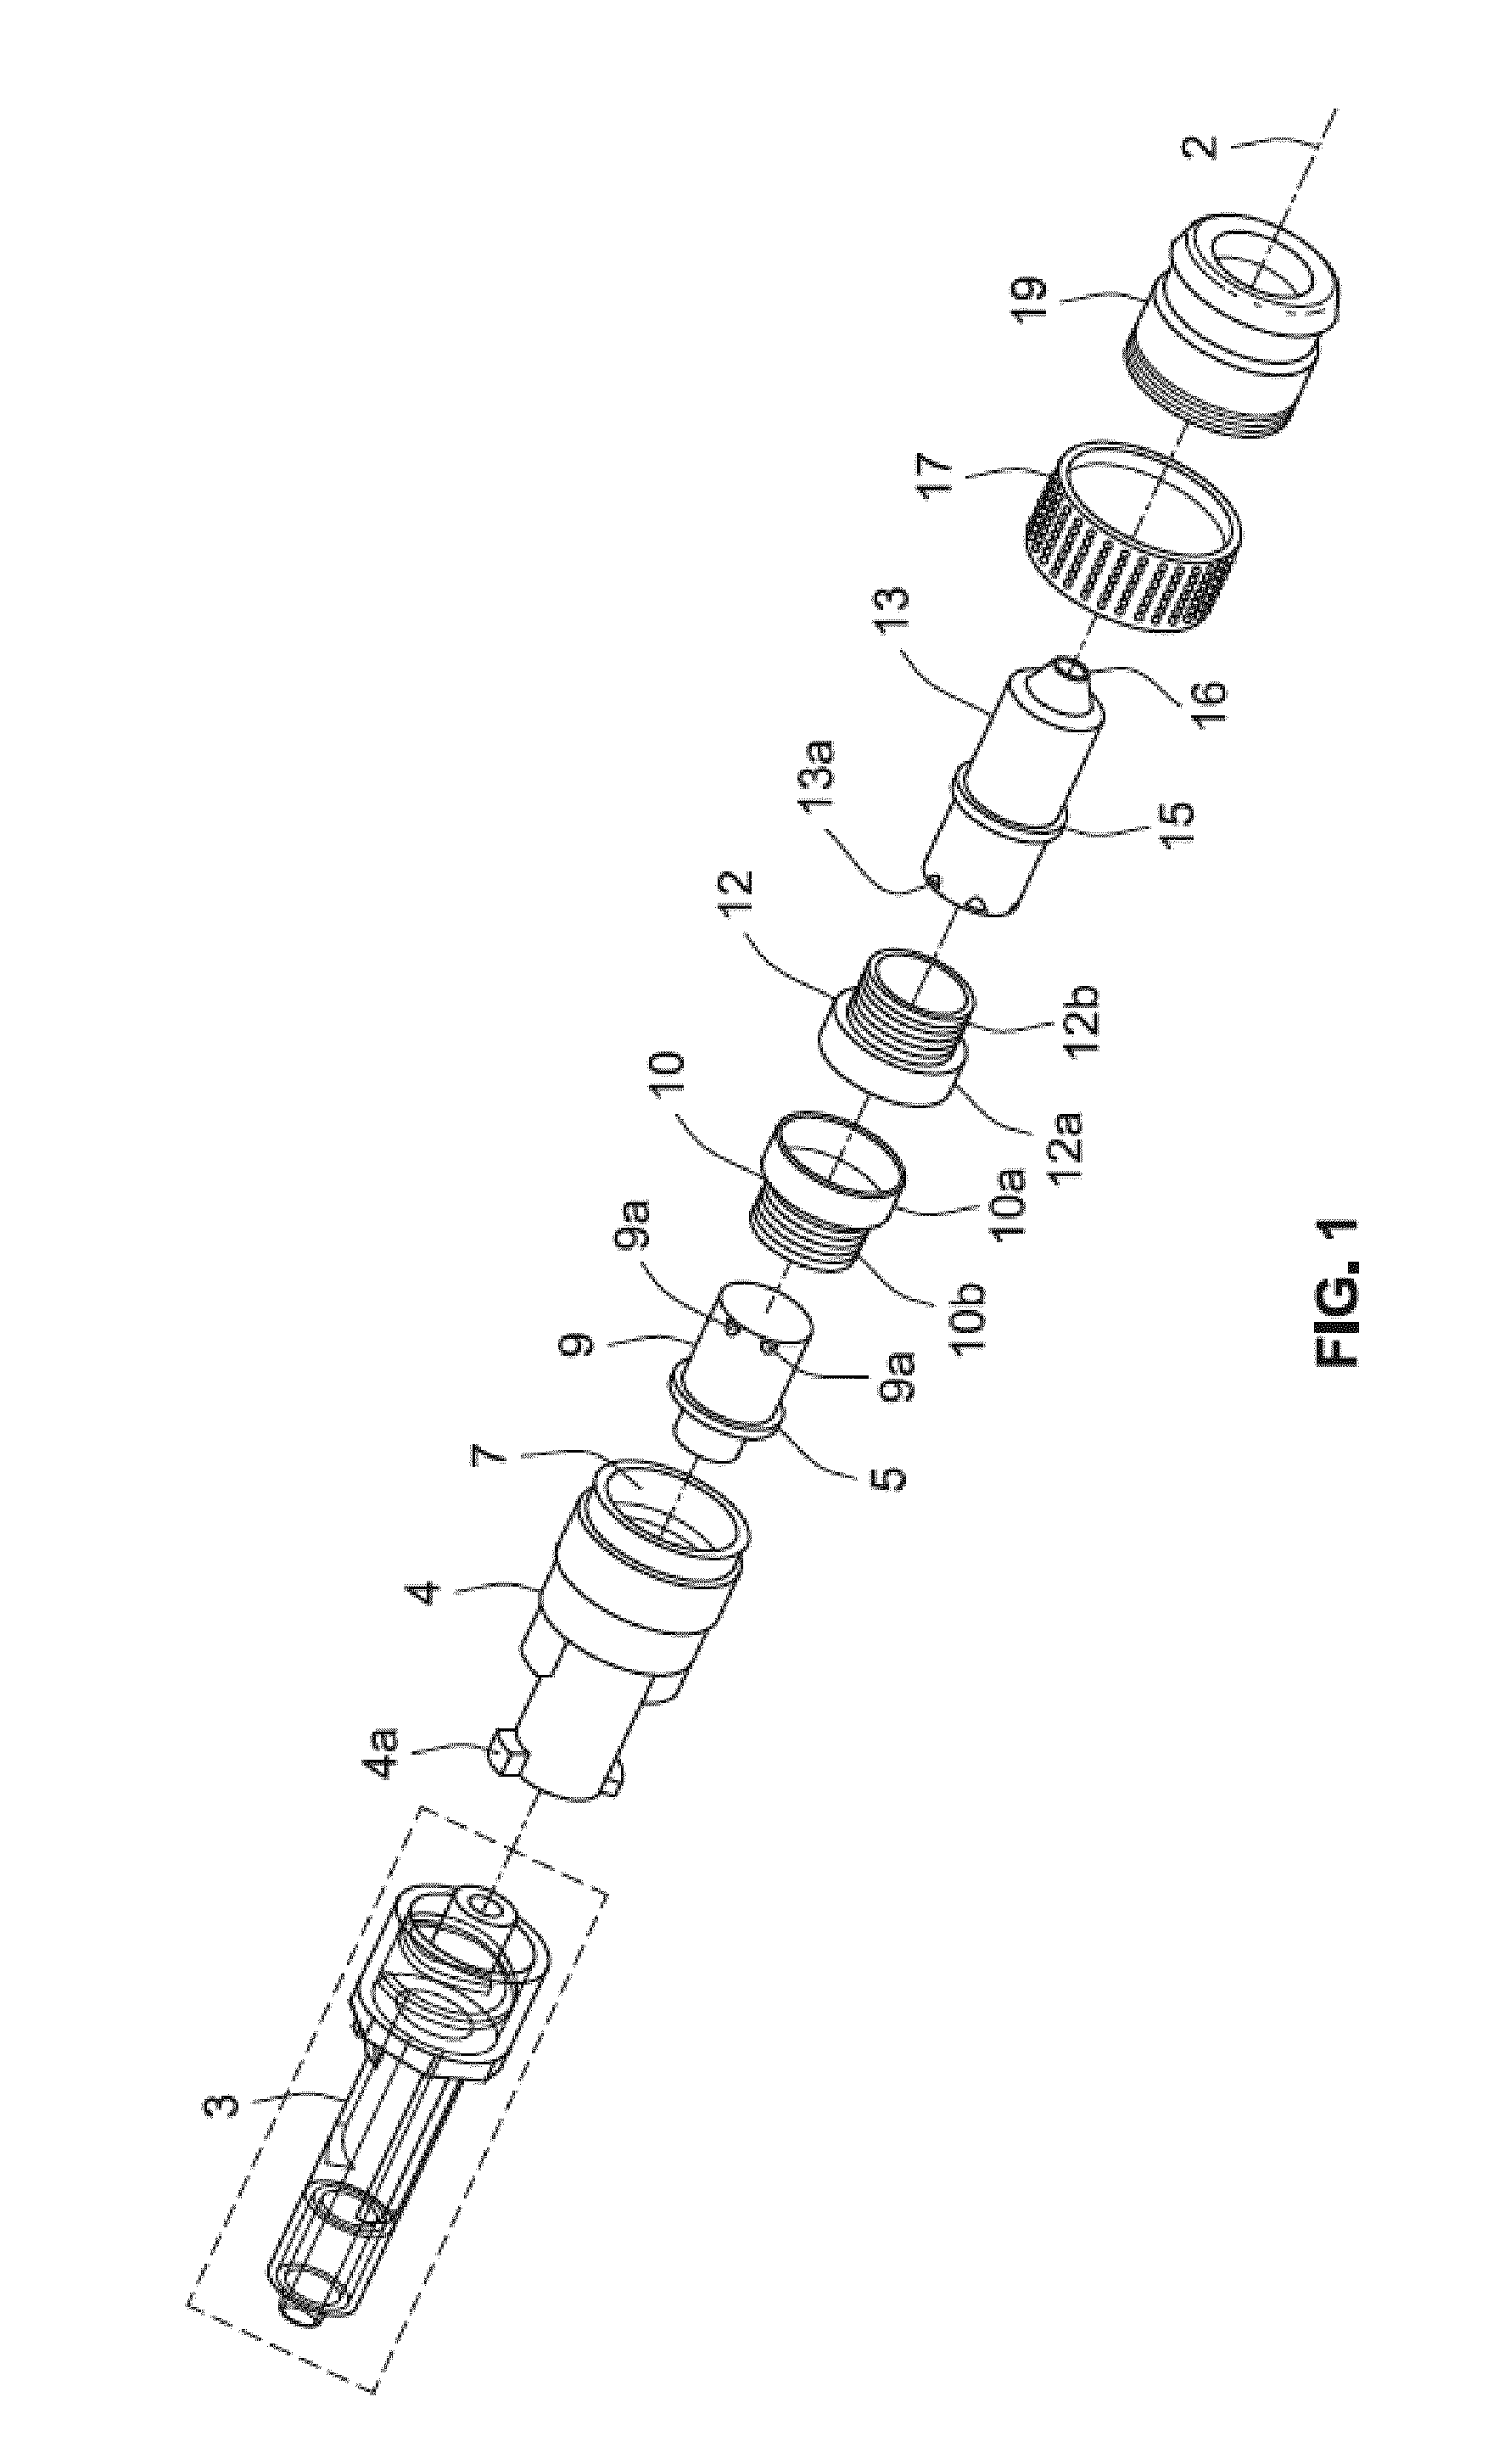 Strain relieving valve assembly with flow blocking